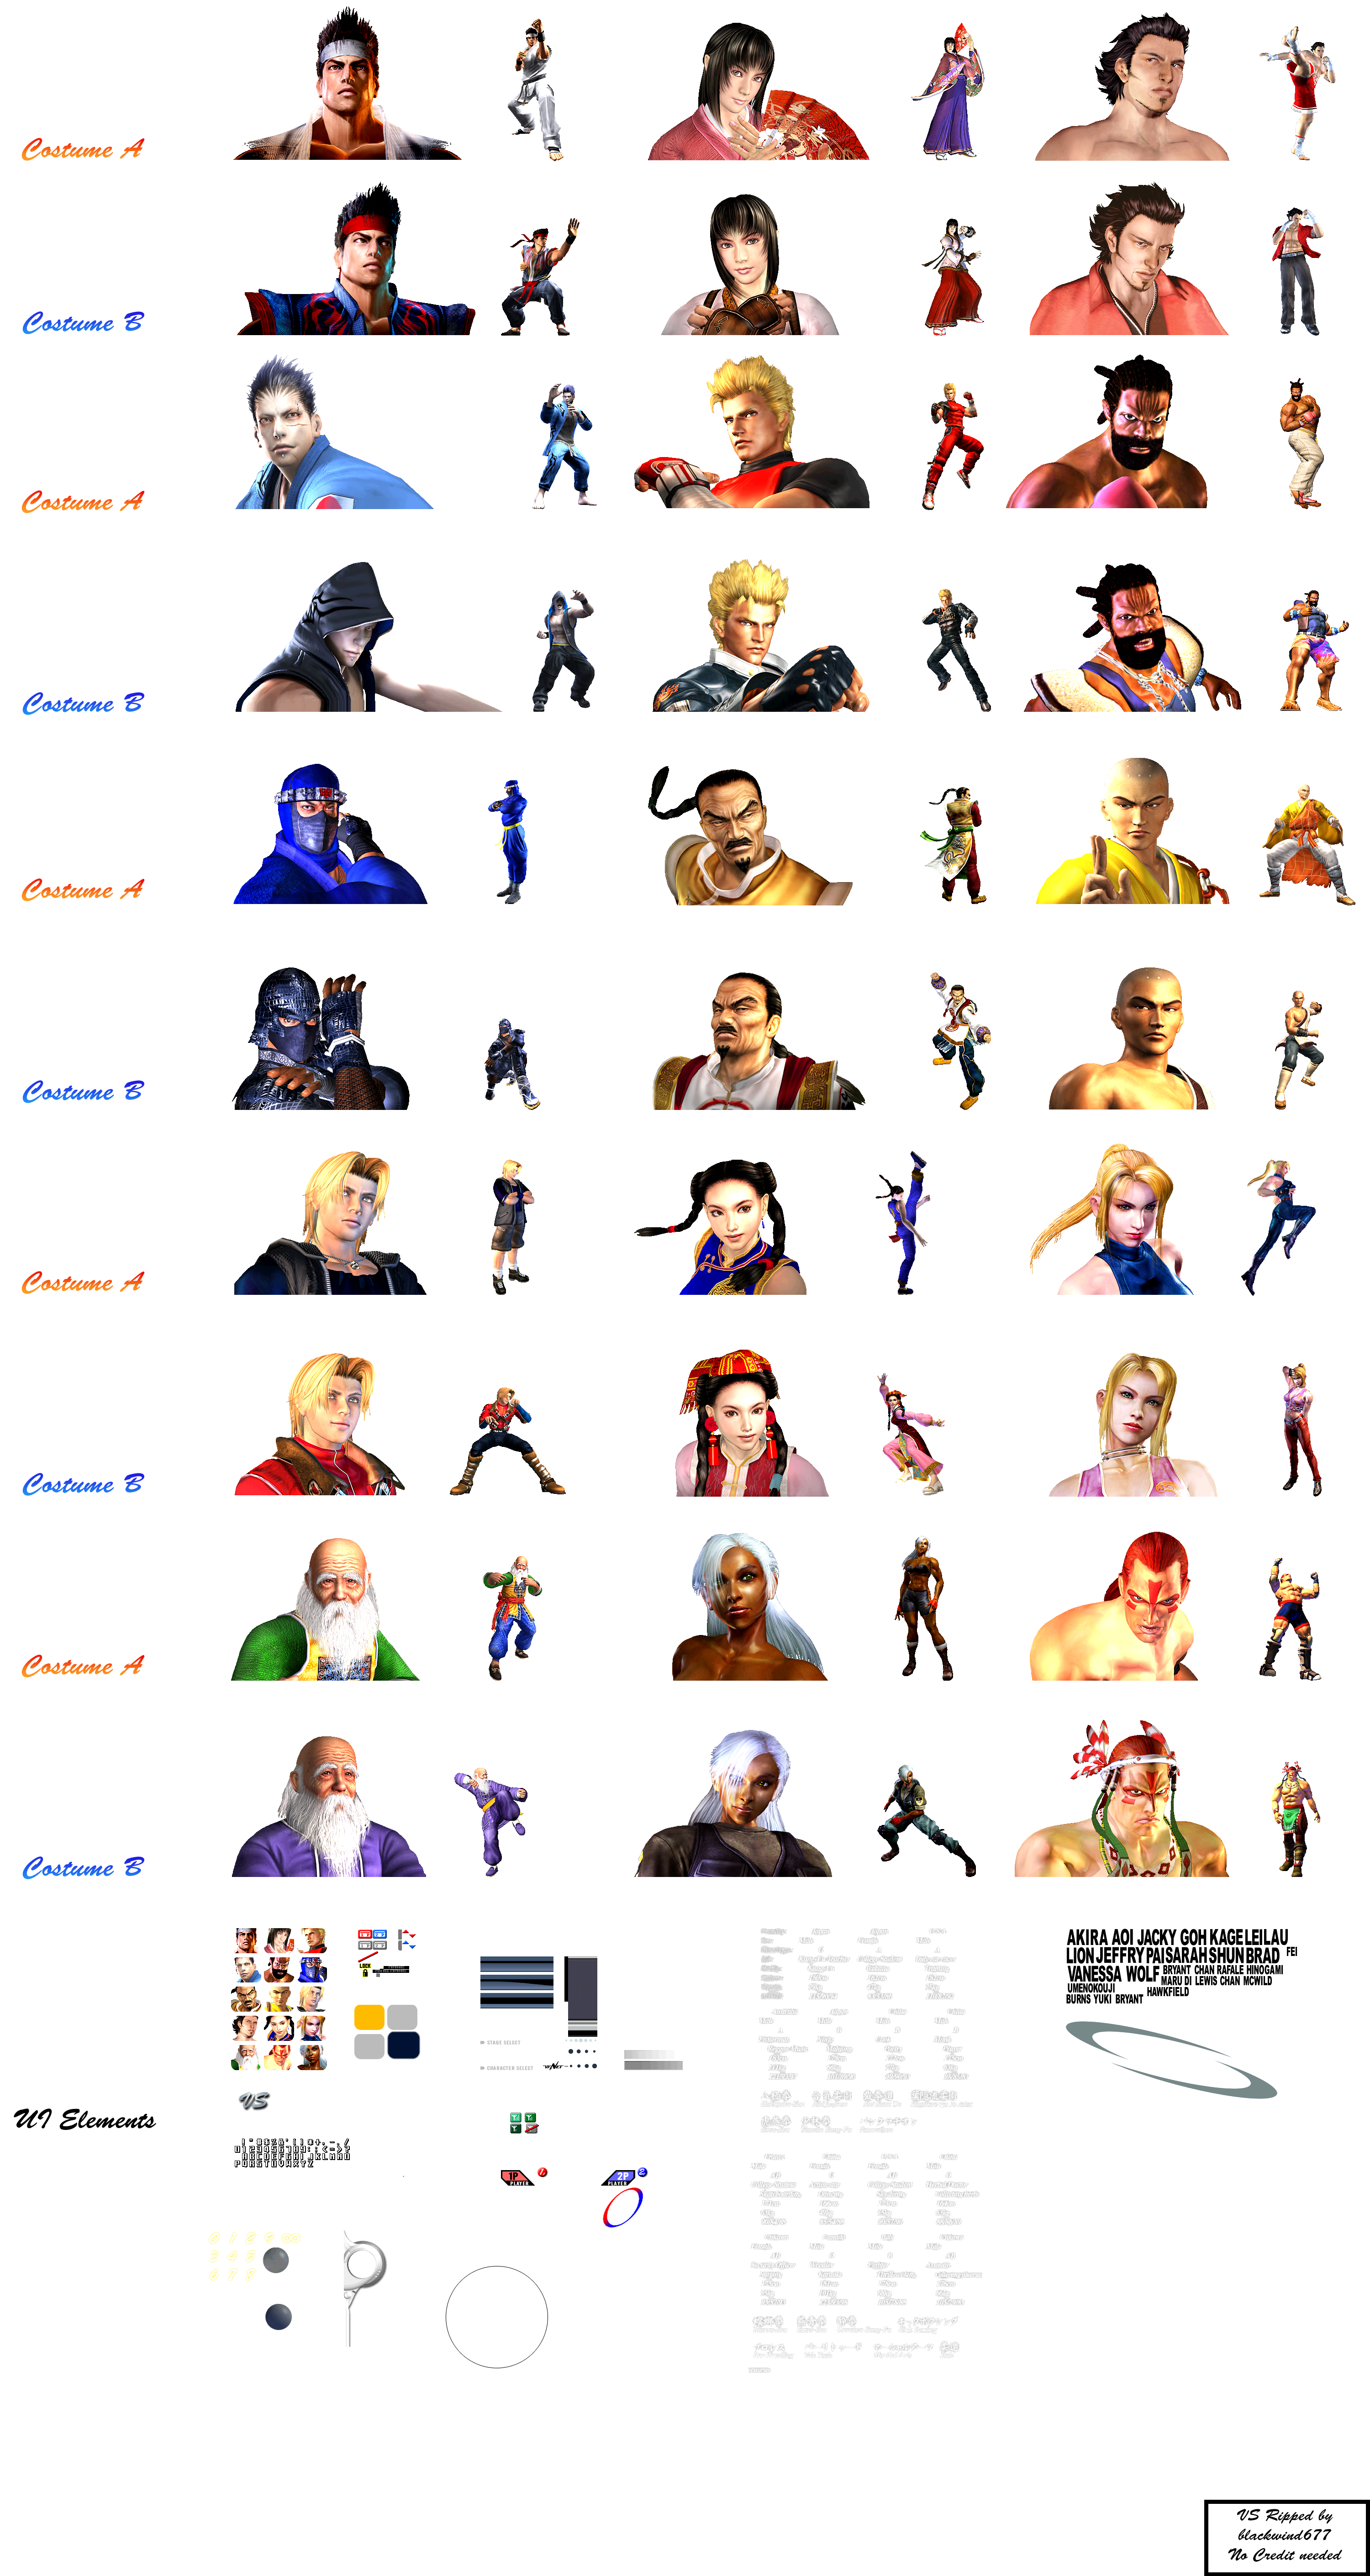 Virtua Fighter 4 Evolution - Character Portraits and VS. User Interface Elements